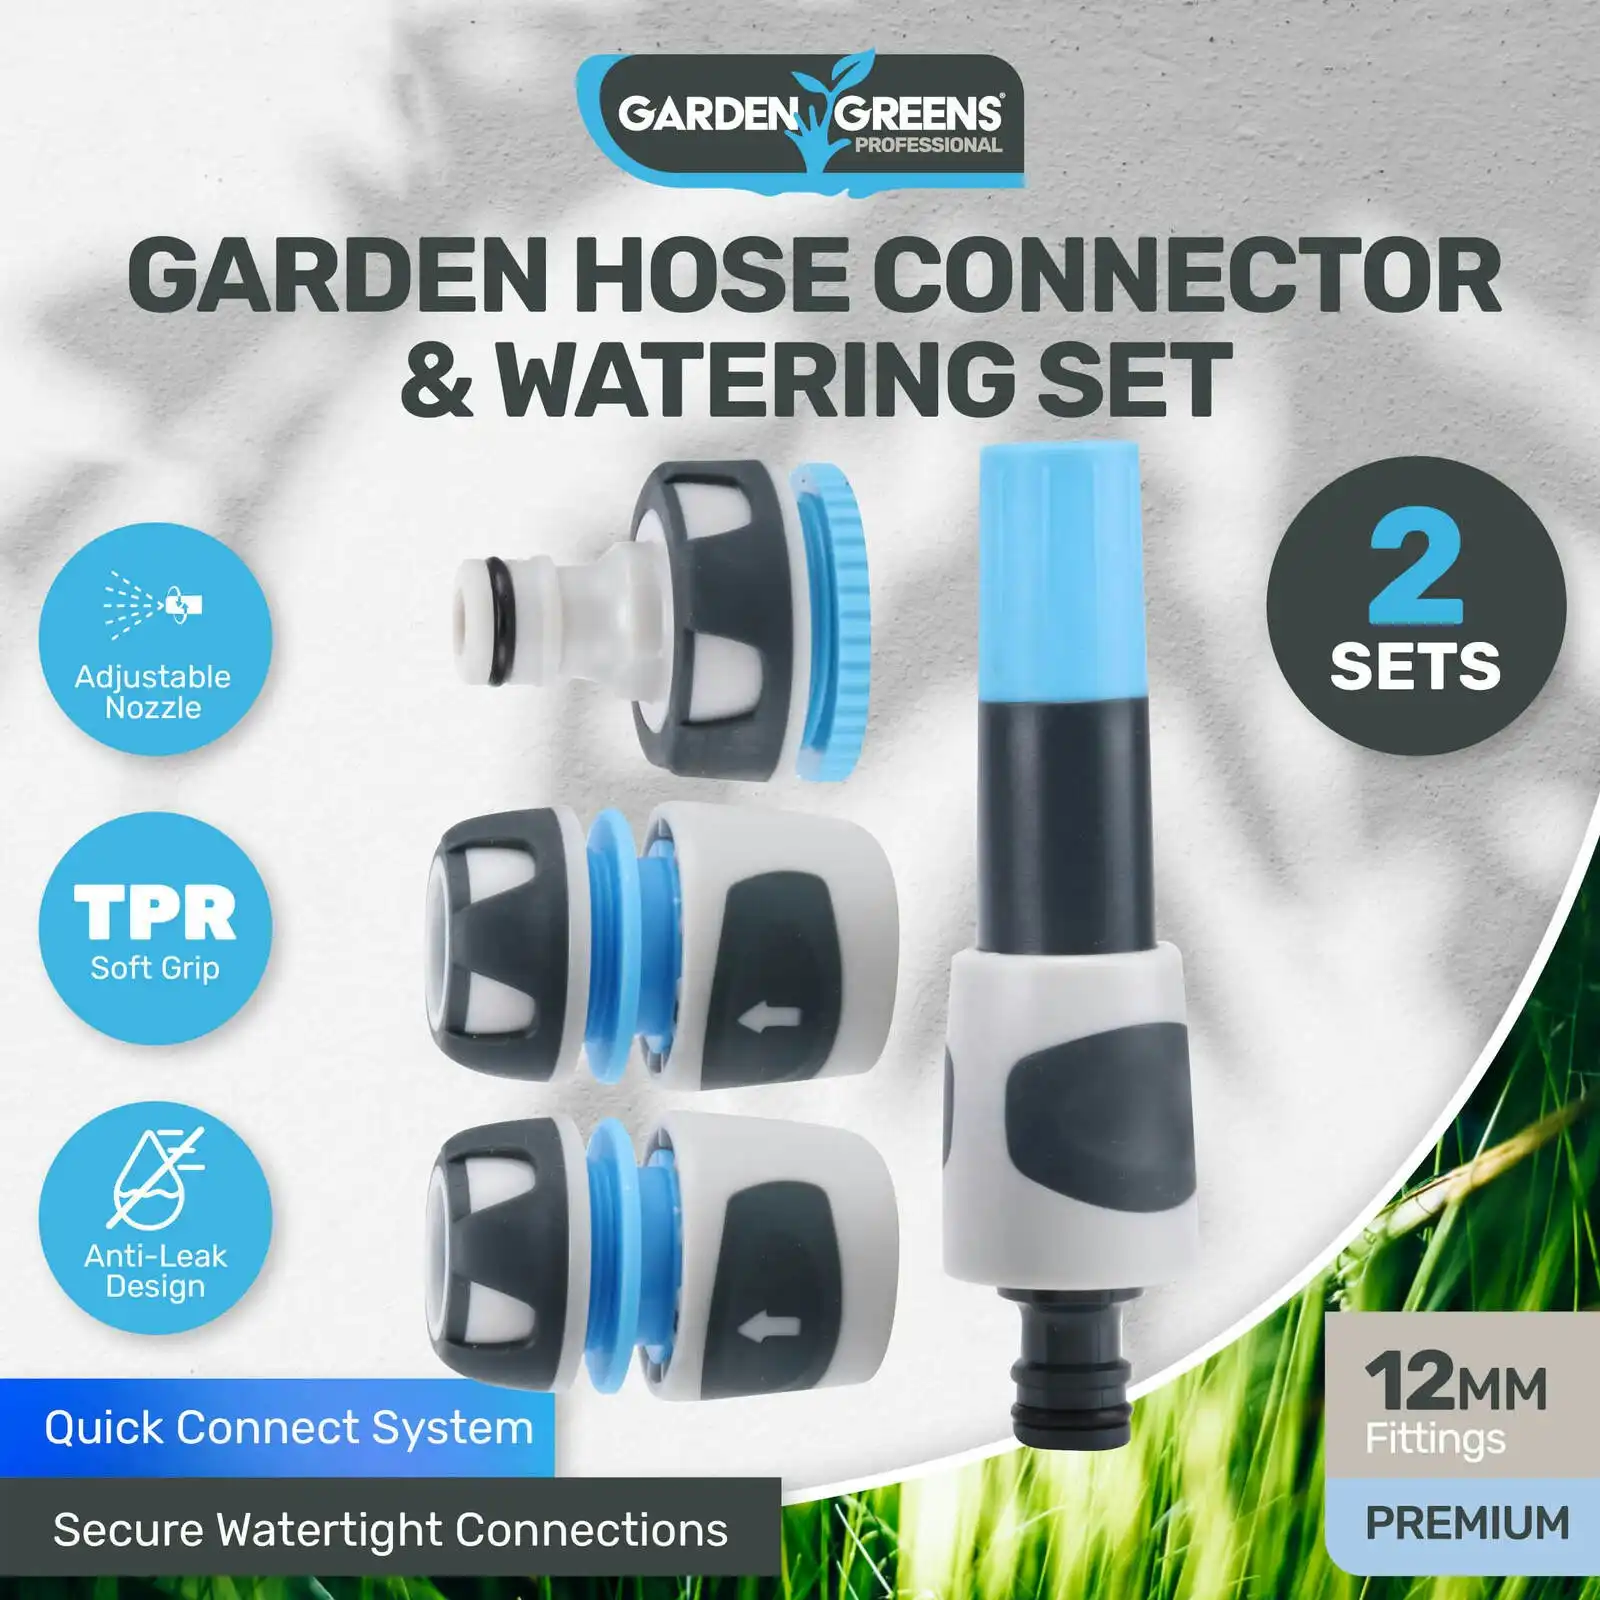 Garden Greens 2 Sets Hose Connector & Watering Sets Premium Quality 12mm